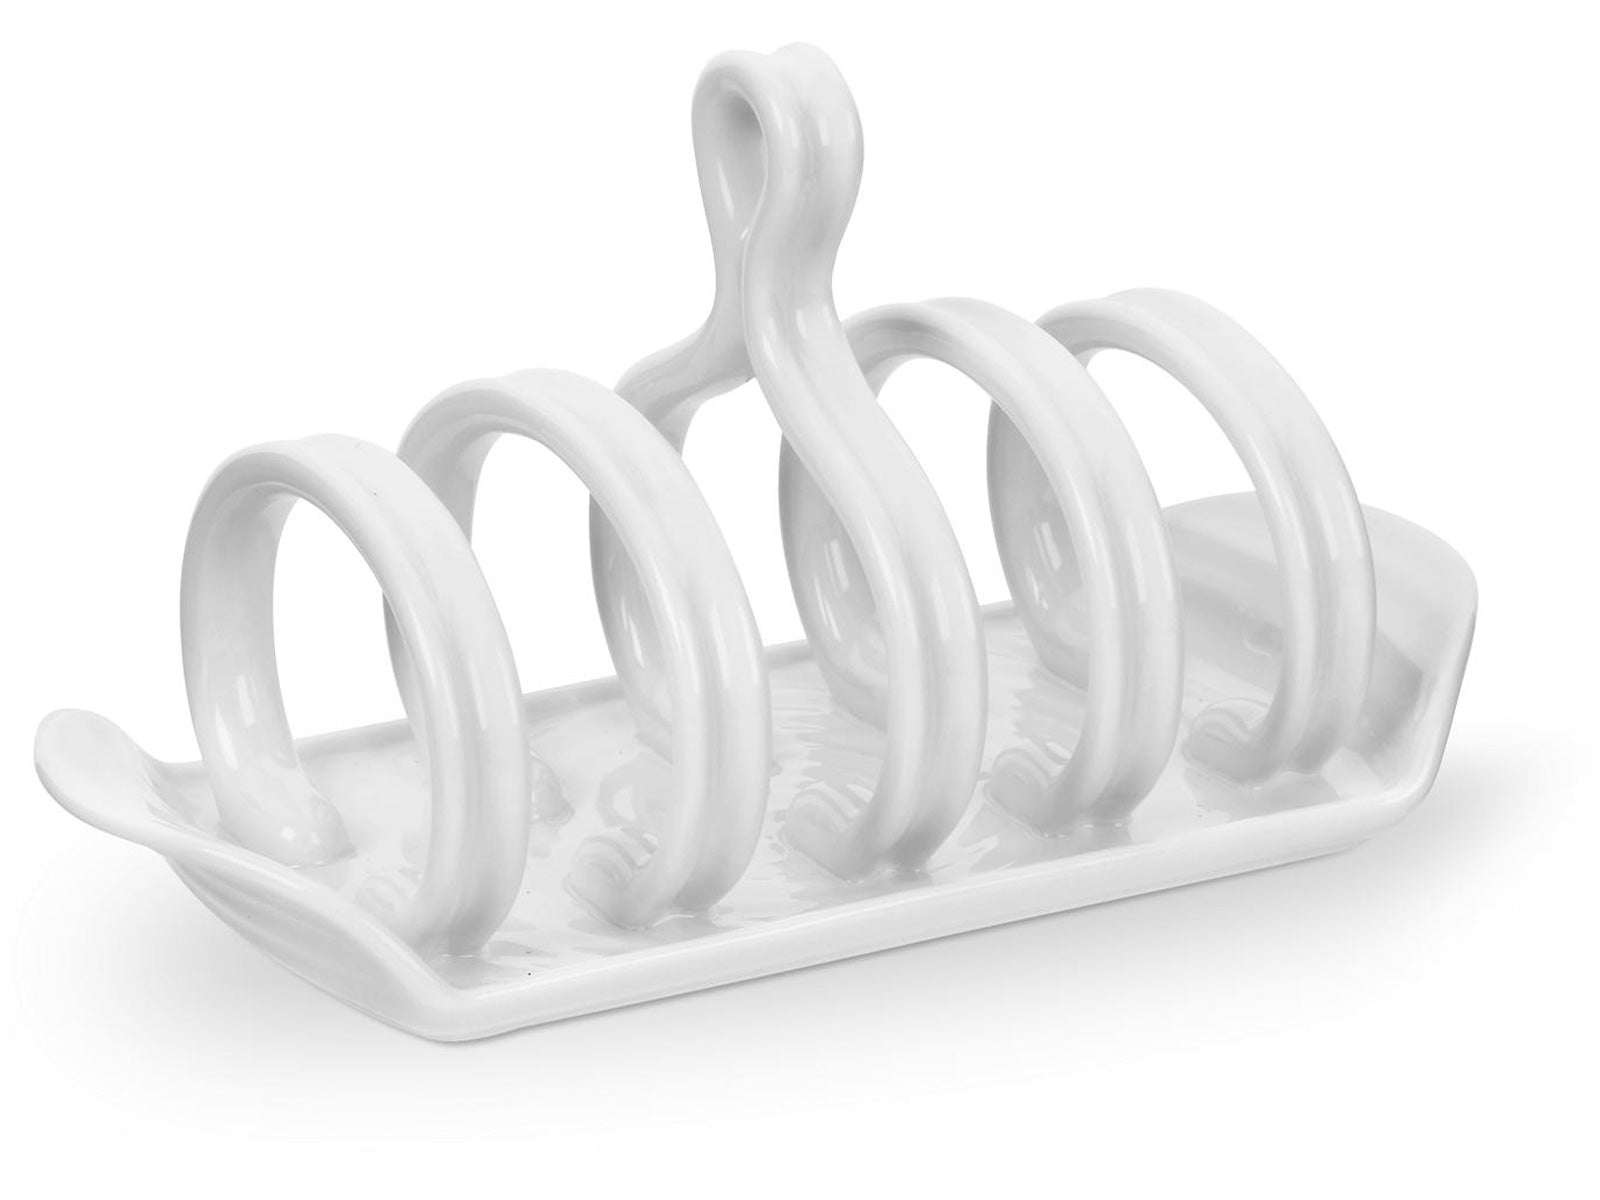 This Sophie Conran White Toast Rack has been made from a white porcelain that has been finished with a clear glaze. The porcelain has been designed with her rippled effect, and the piece is ideal for holding up to four slices of toast. It also has a small handle to carry easily, and is dishwasher and microwave safe.